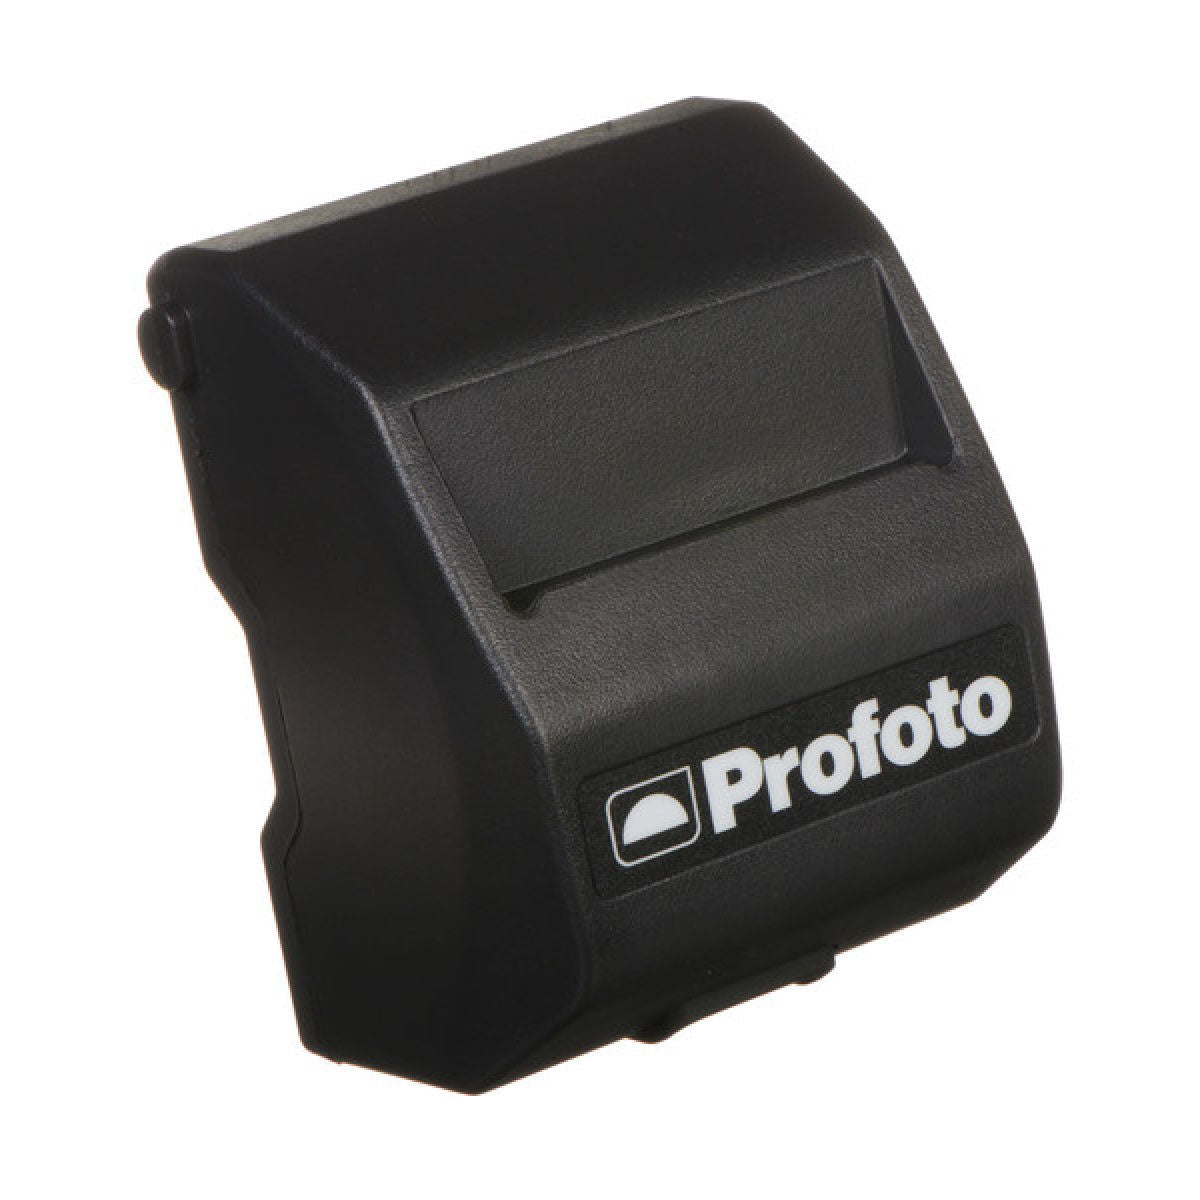 Profoto Lithium-ion Battery for B1 and B1x Airttl Flash Heads